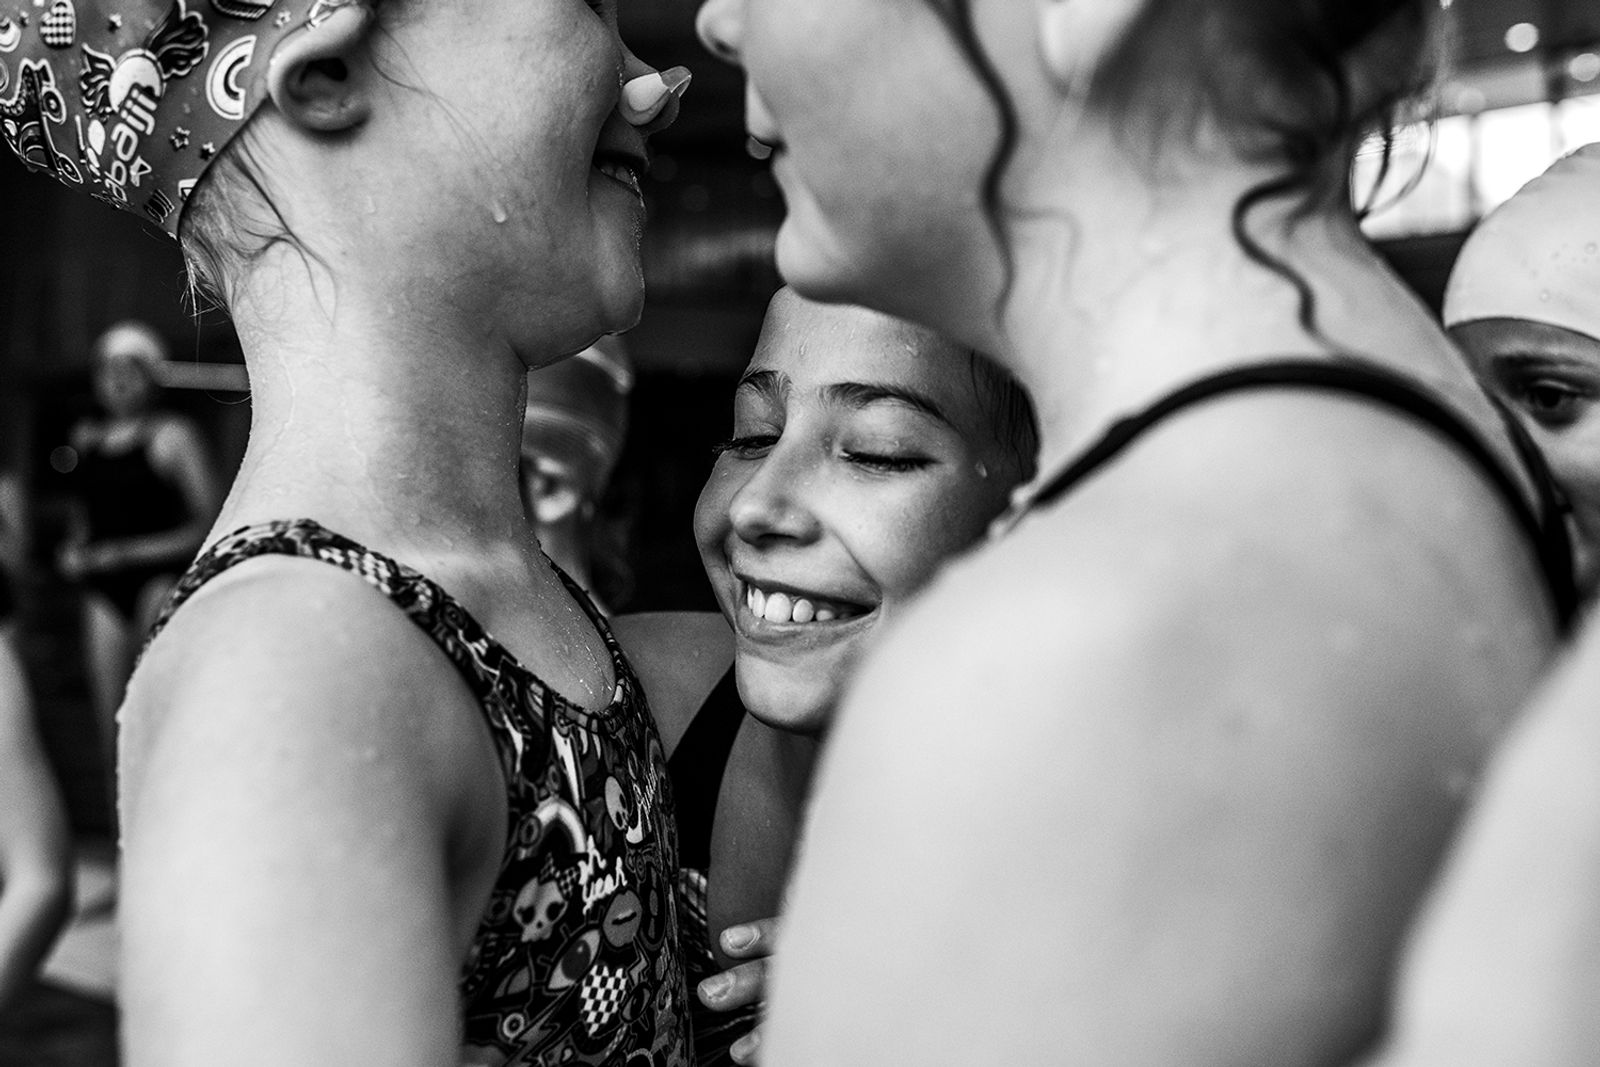 © Carla Kogelman - Image from the SYNC SWIM photography project